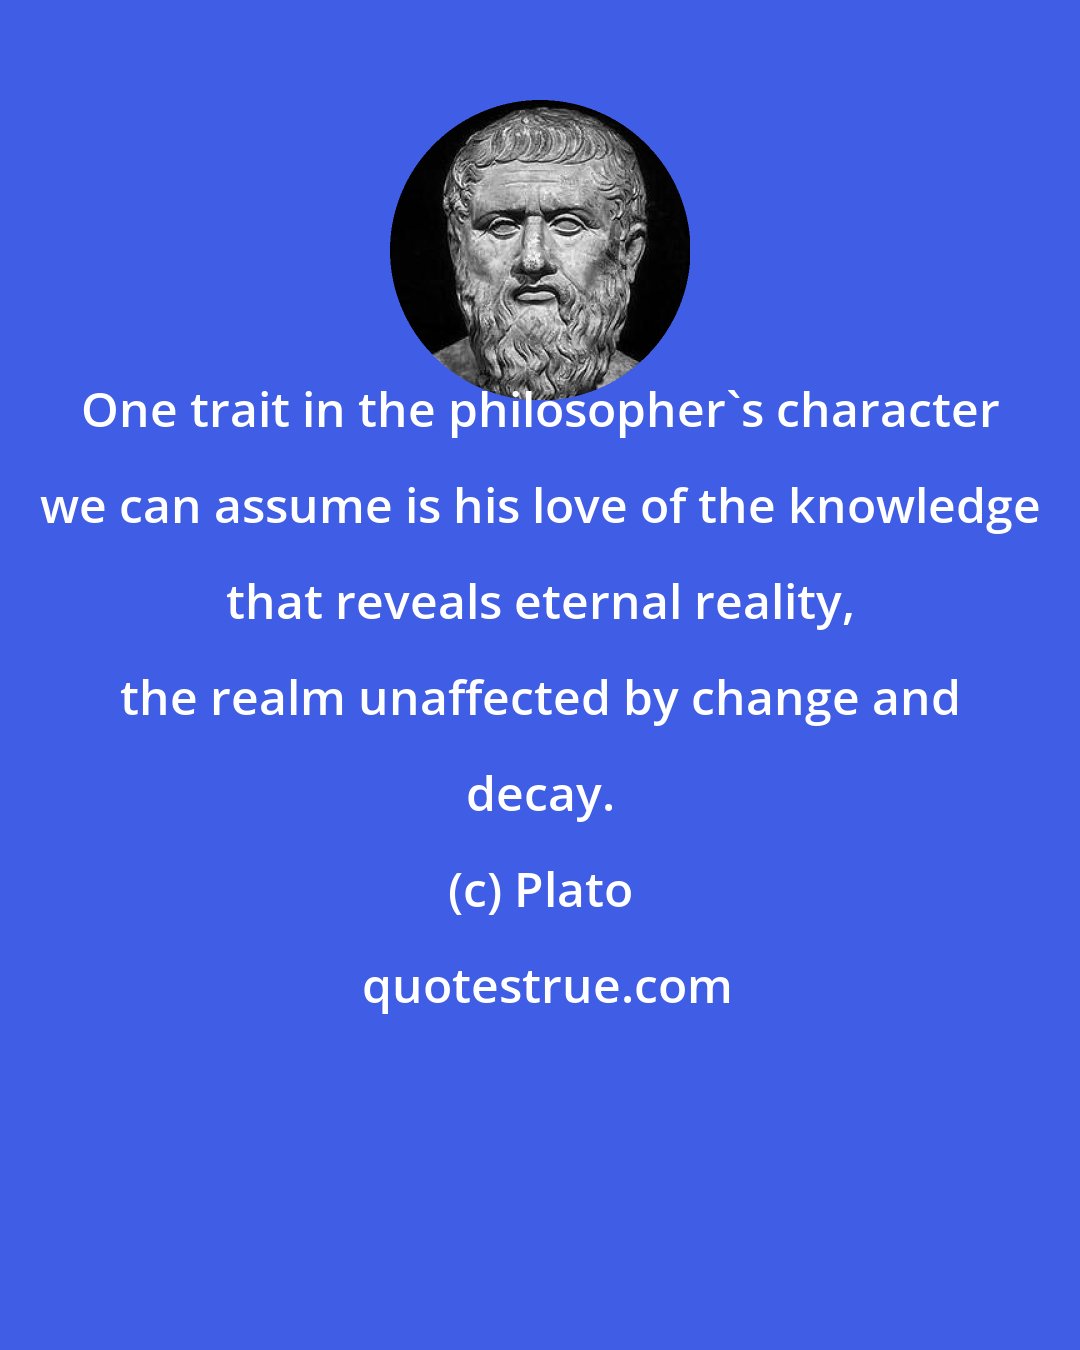 Plato: One trait in the philosopher's character we can assume is his love of the knowledge that reveals eternal reality, the realm unaffected by change and decay.